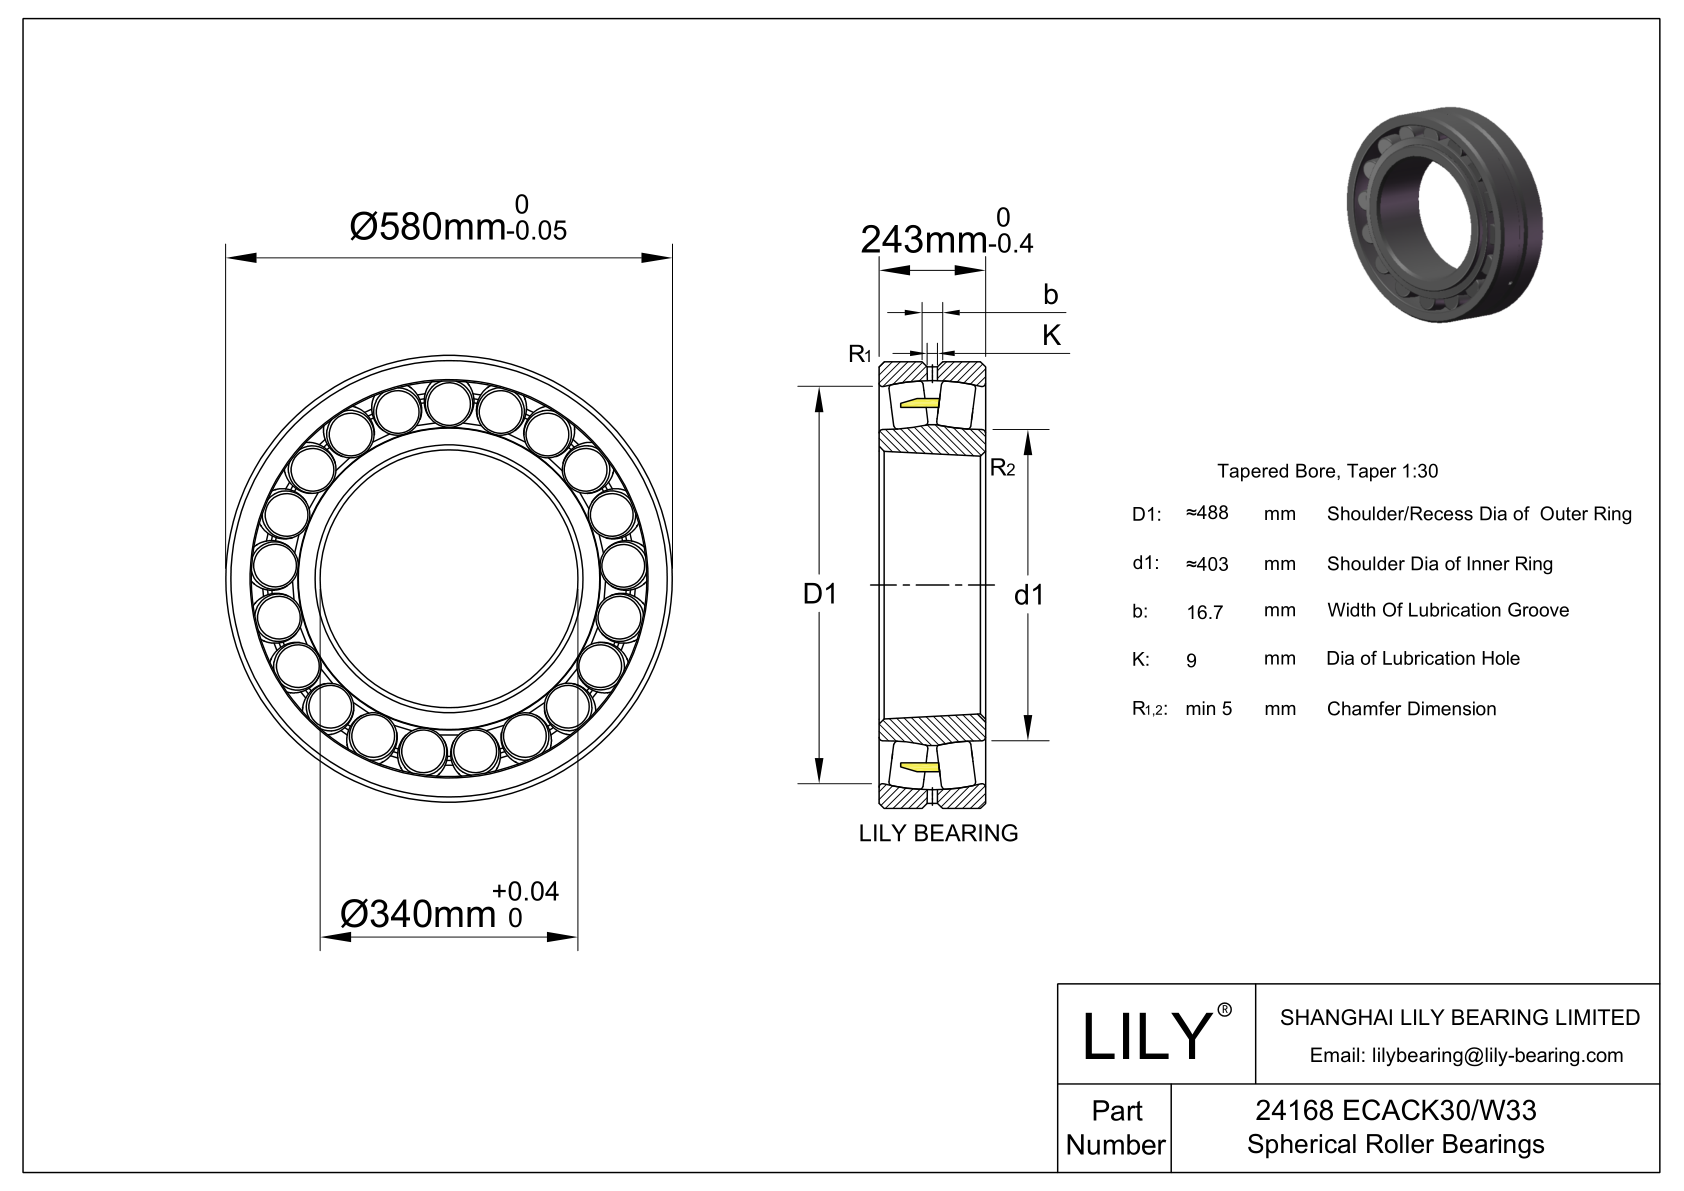 24168 ECACK30/W33 Double Row Spherical Roller Bearing cad drawing